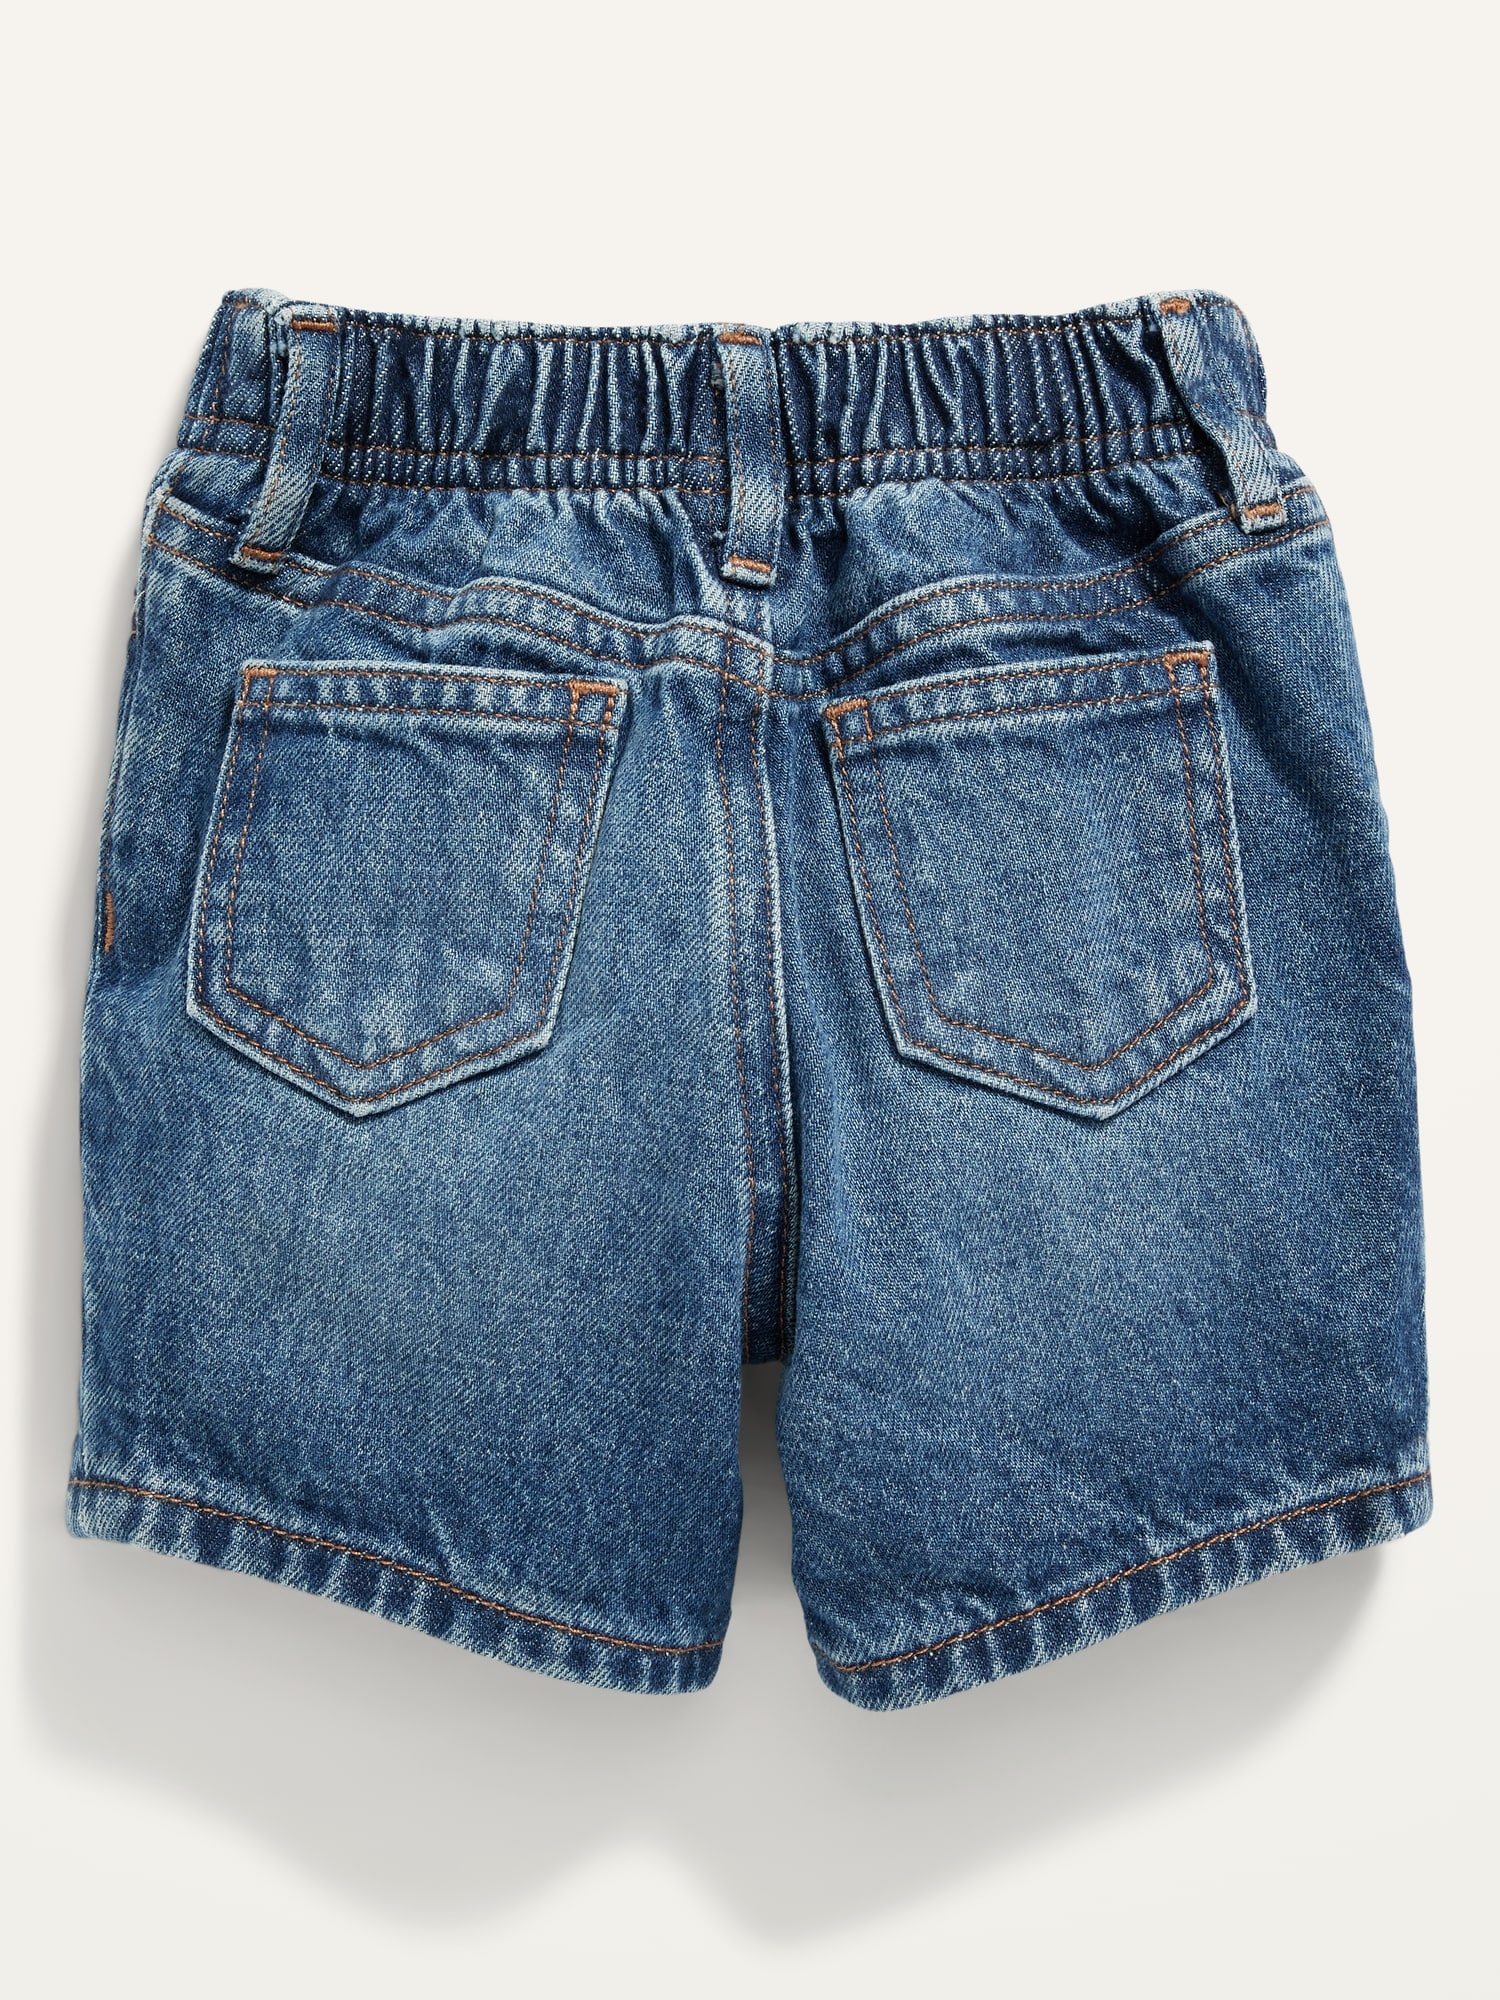 Unisex Jean Pull-On Shorts for Baby | Old Navy